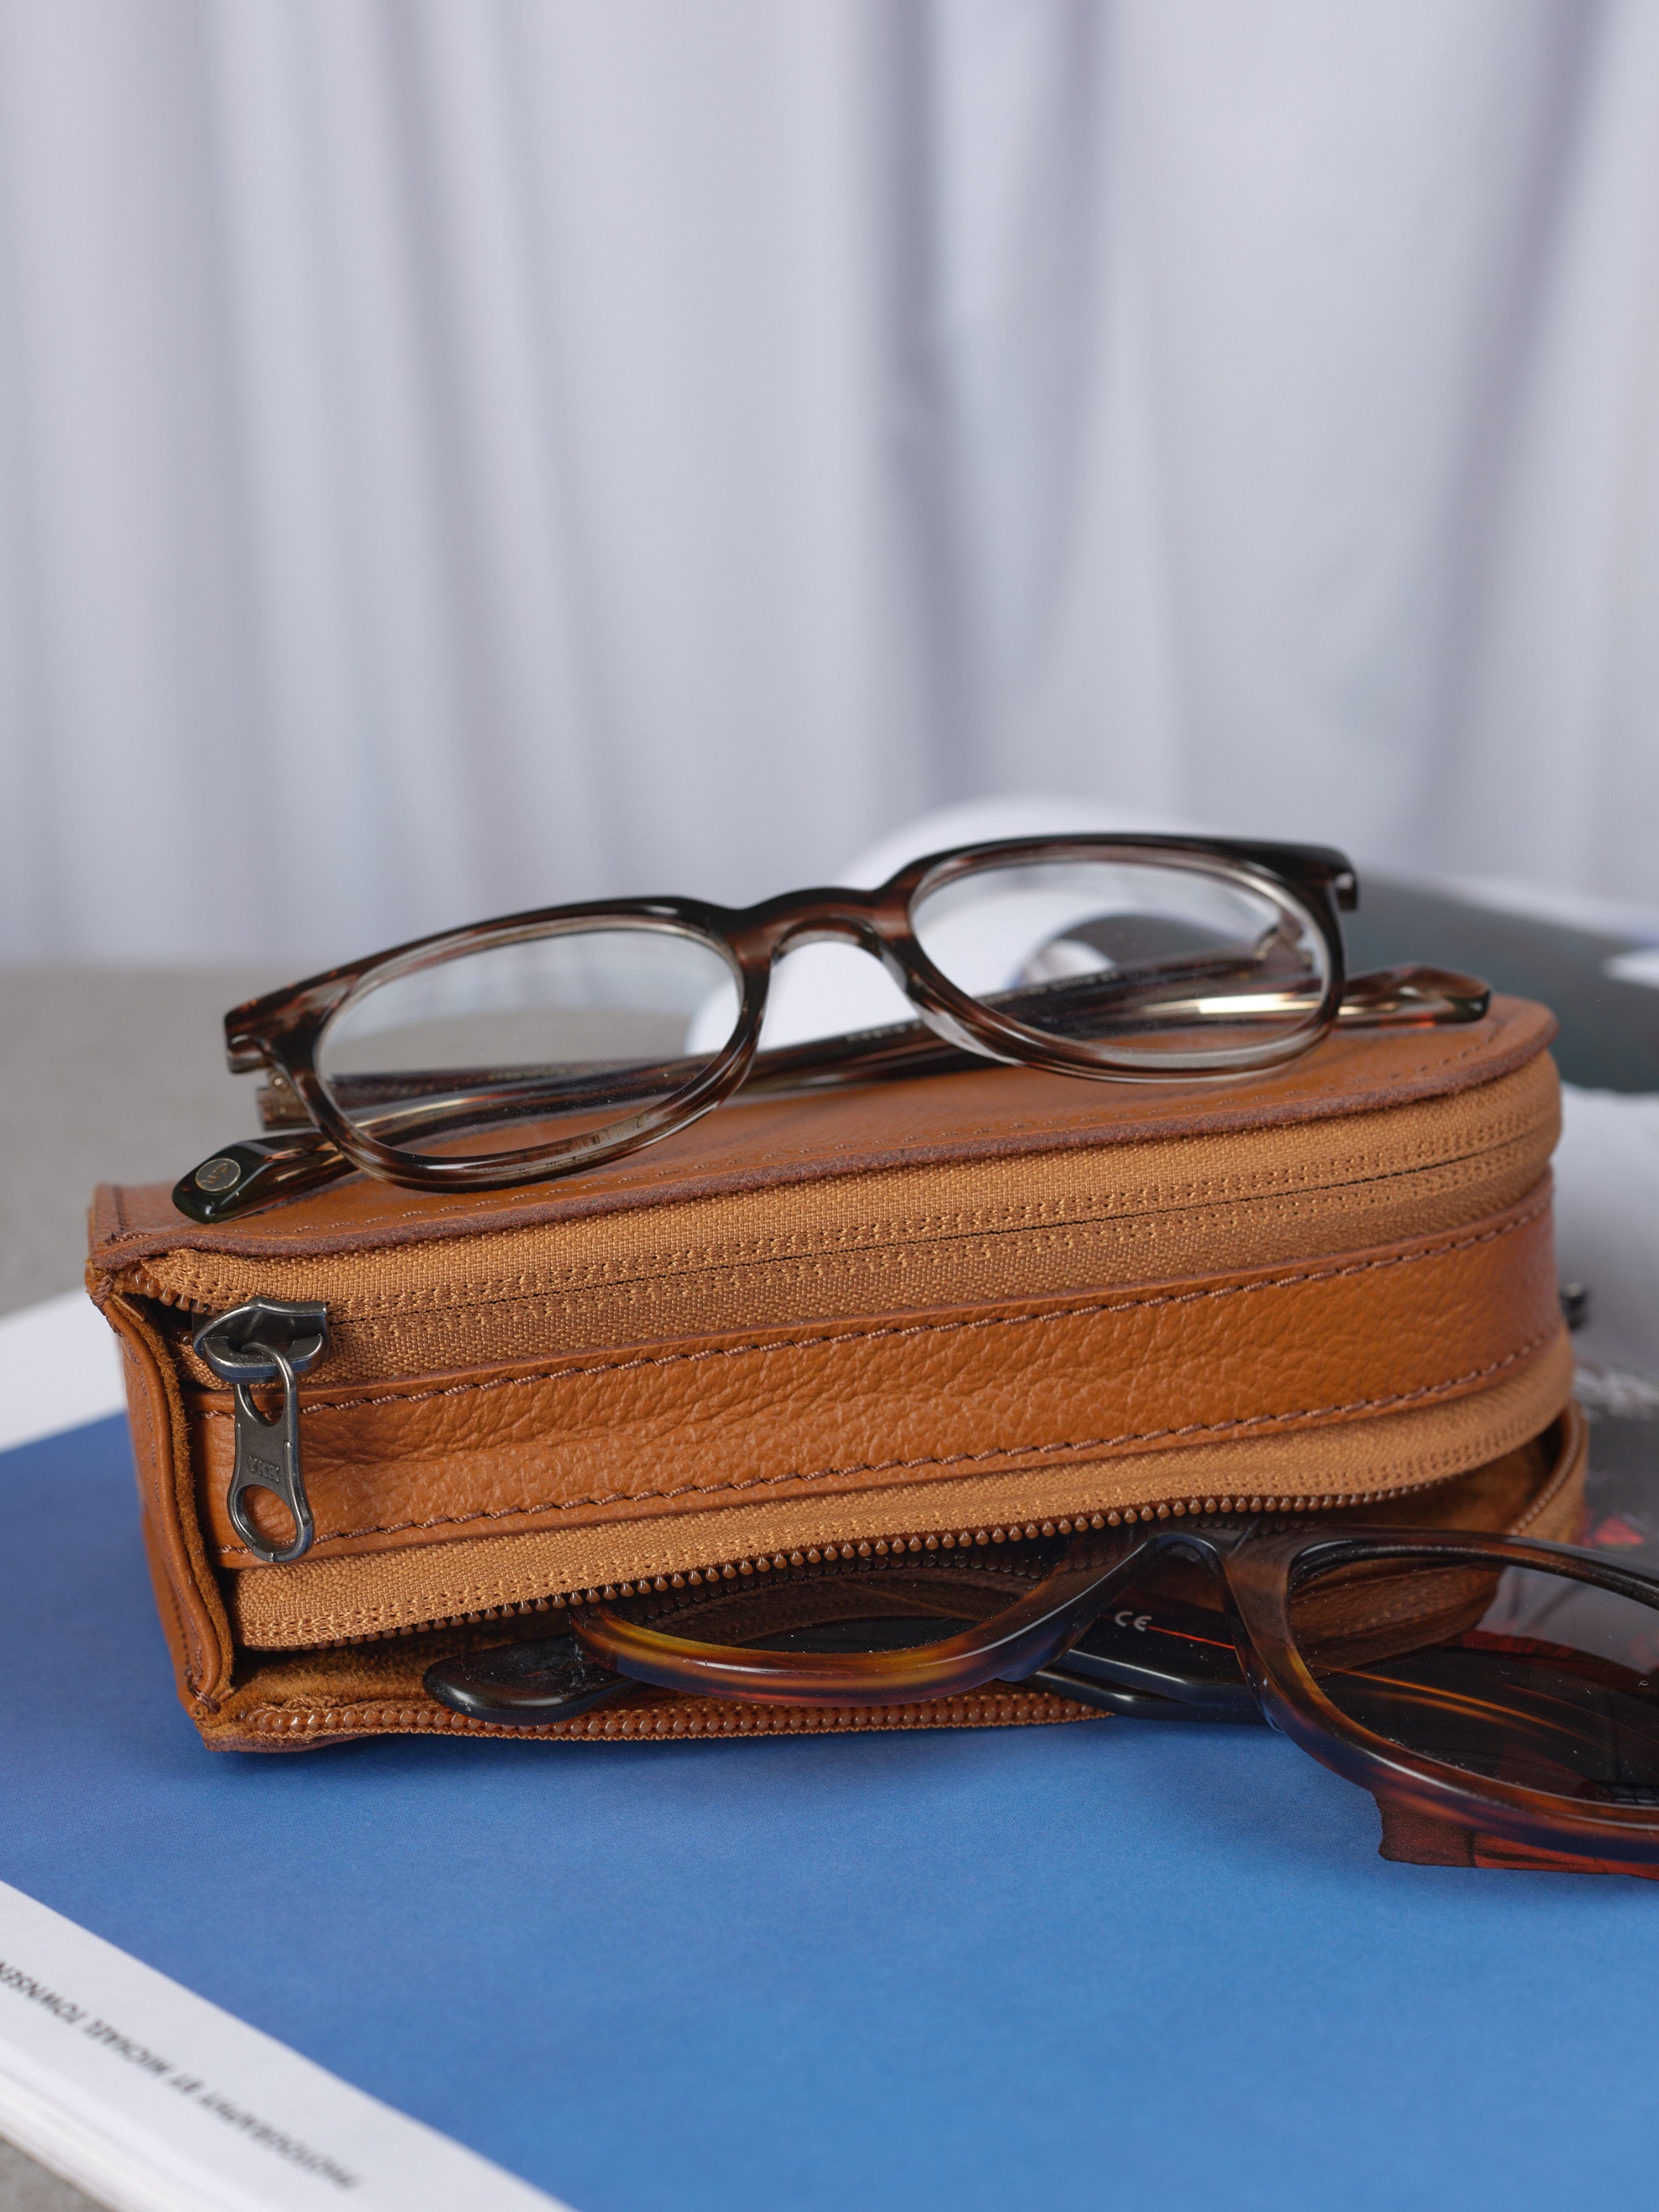 Leather Sunglasses Case, Leather Glasses Case, Leather Glasses Bag